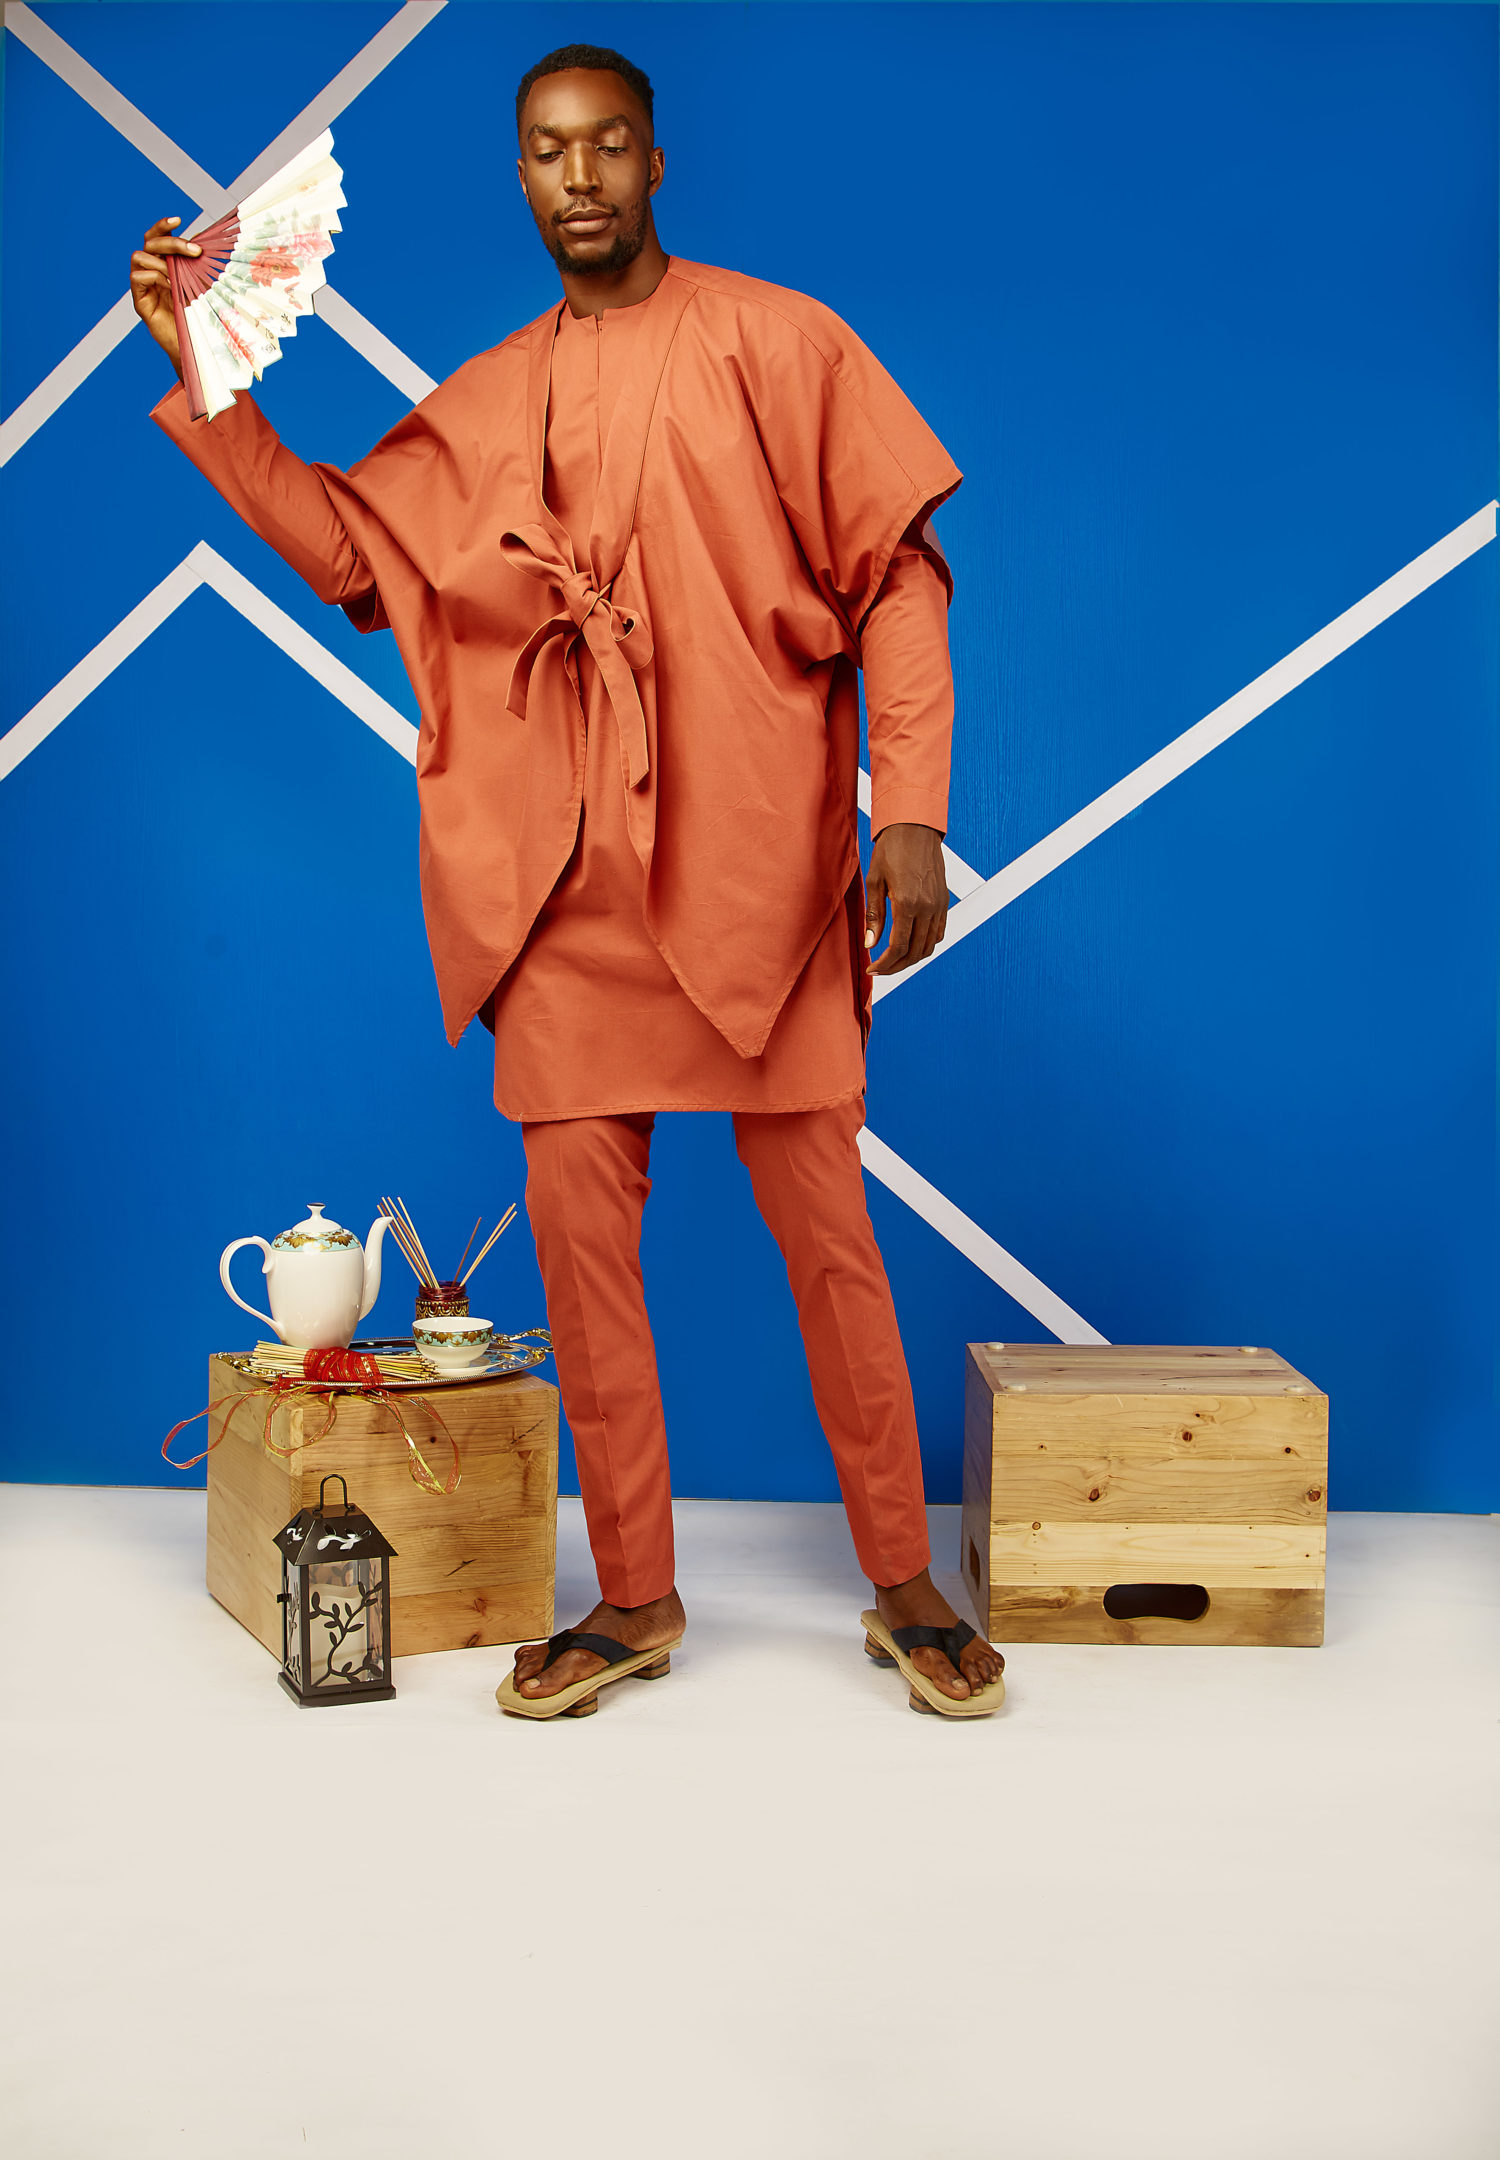 MUST SEE: Signore Fusion by Vanskere Presents “Kabuki” For Spring/Summer 2019